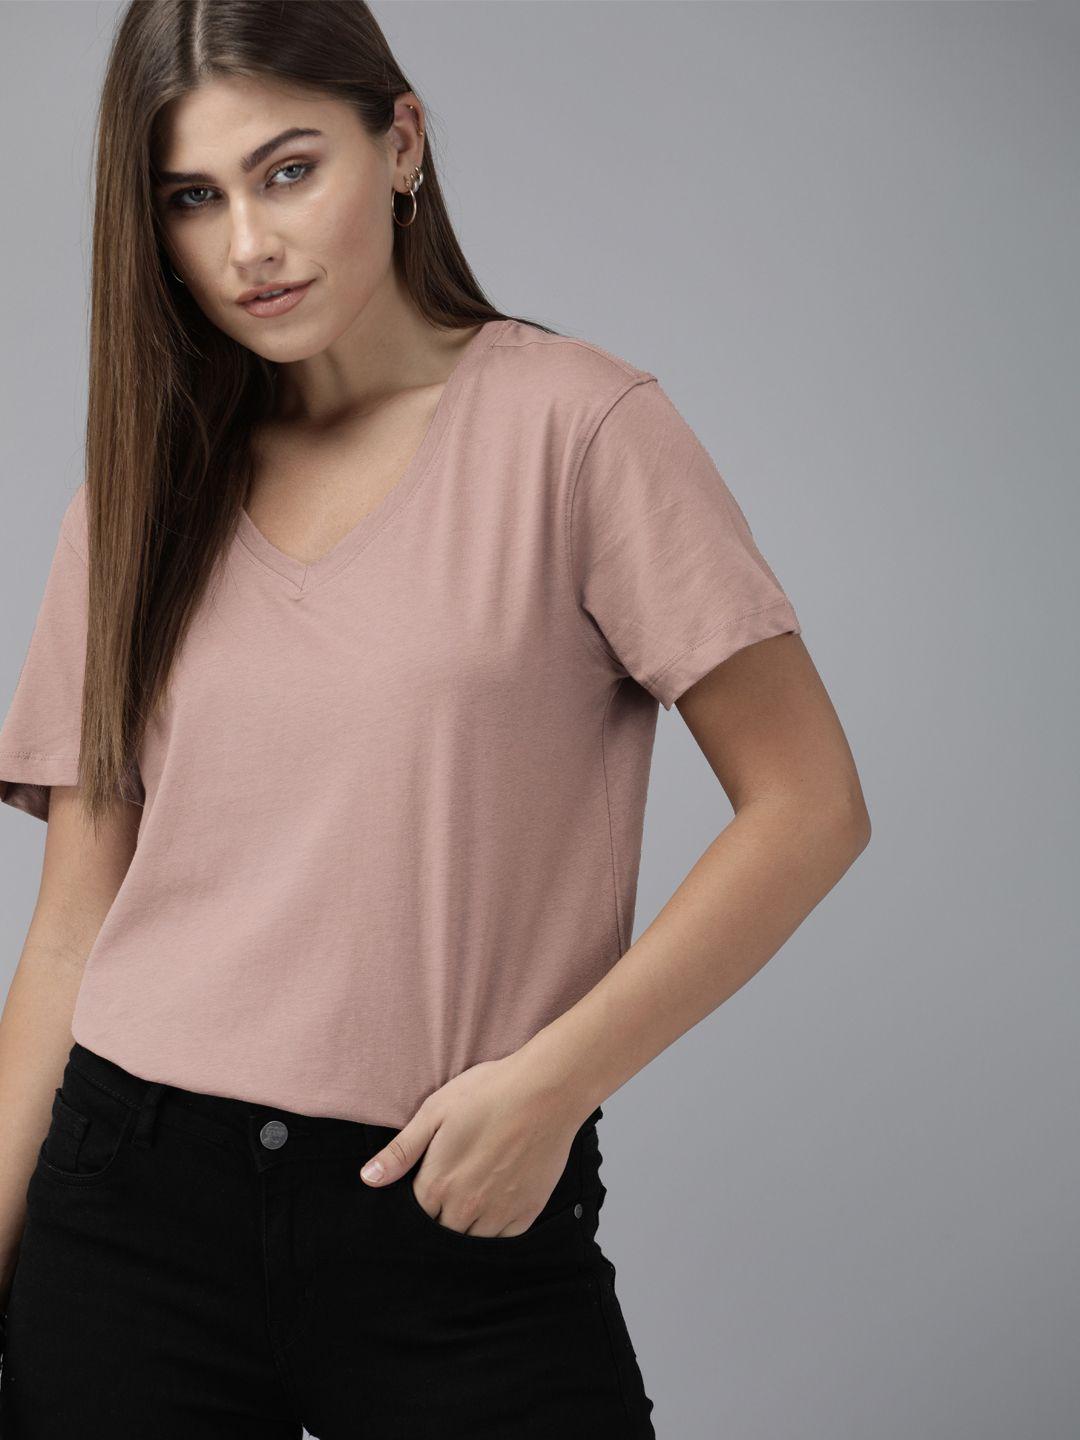 the roadster lifestyle co women mauve solid v-neck t-shirt